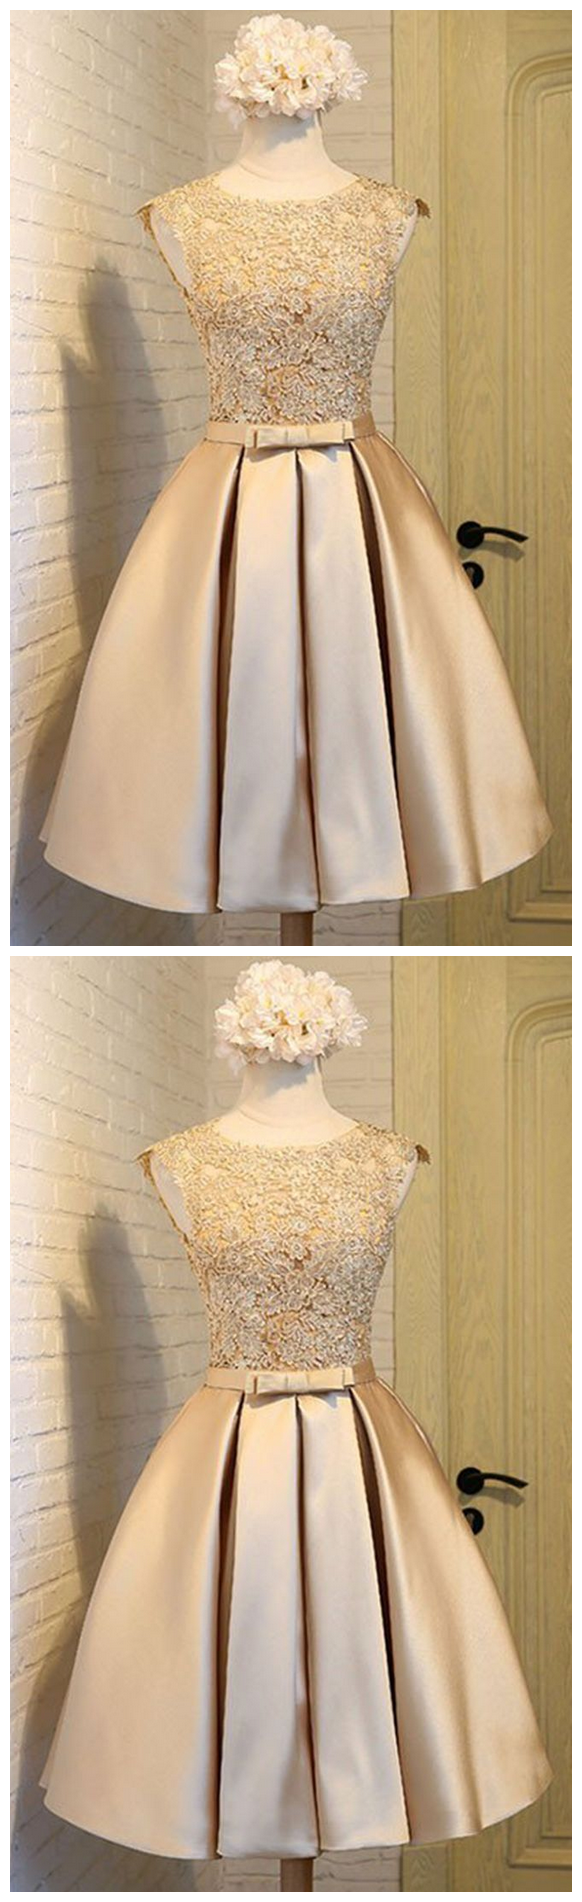 Light Golden Satin Homecoming Dress,lace Round Neck Homecoming Dresses